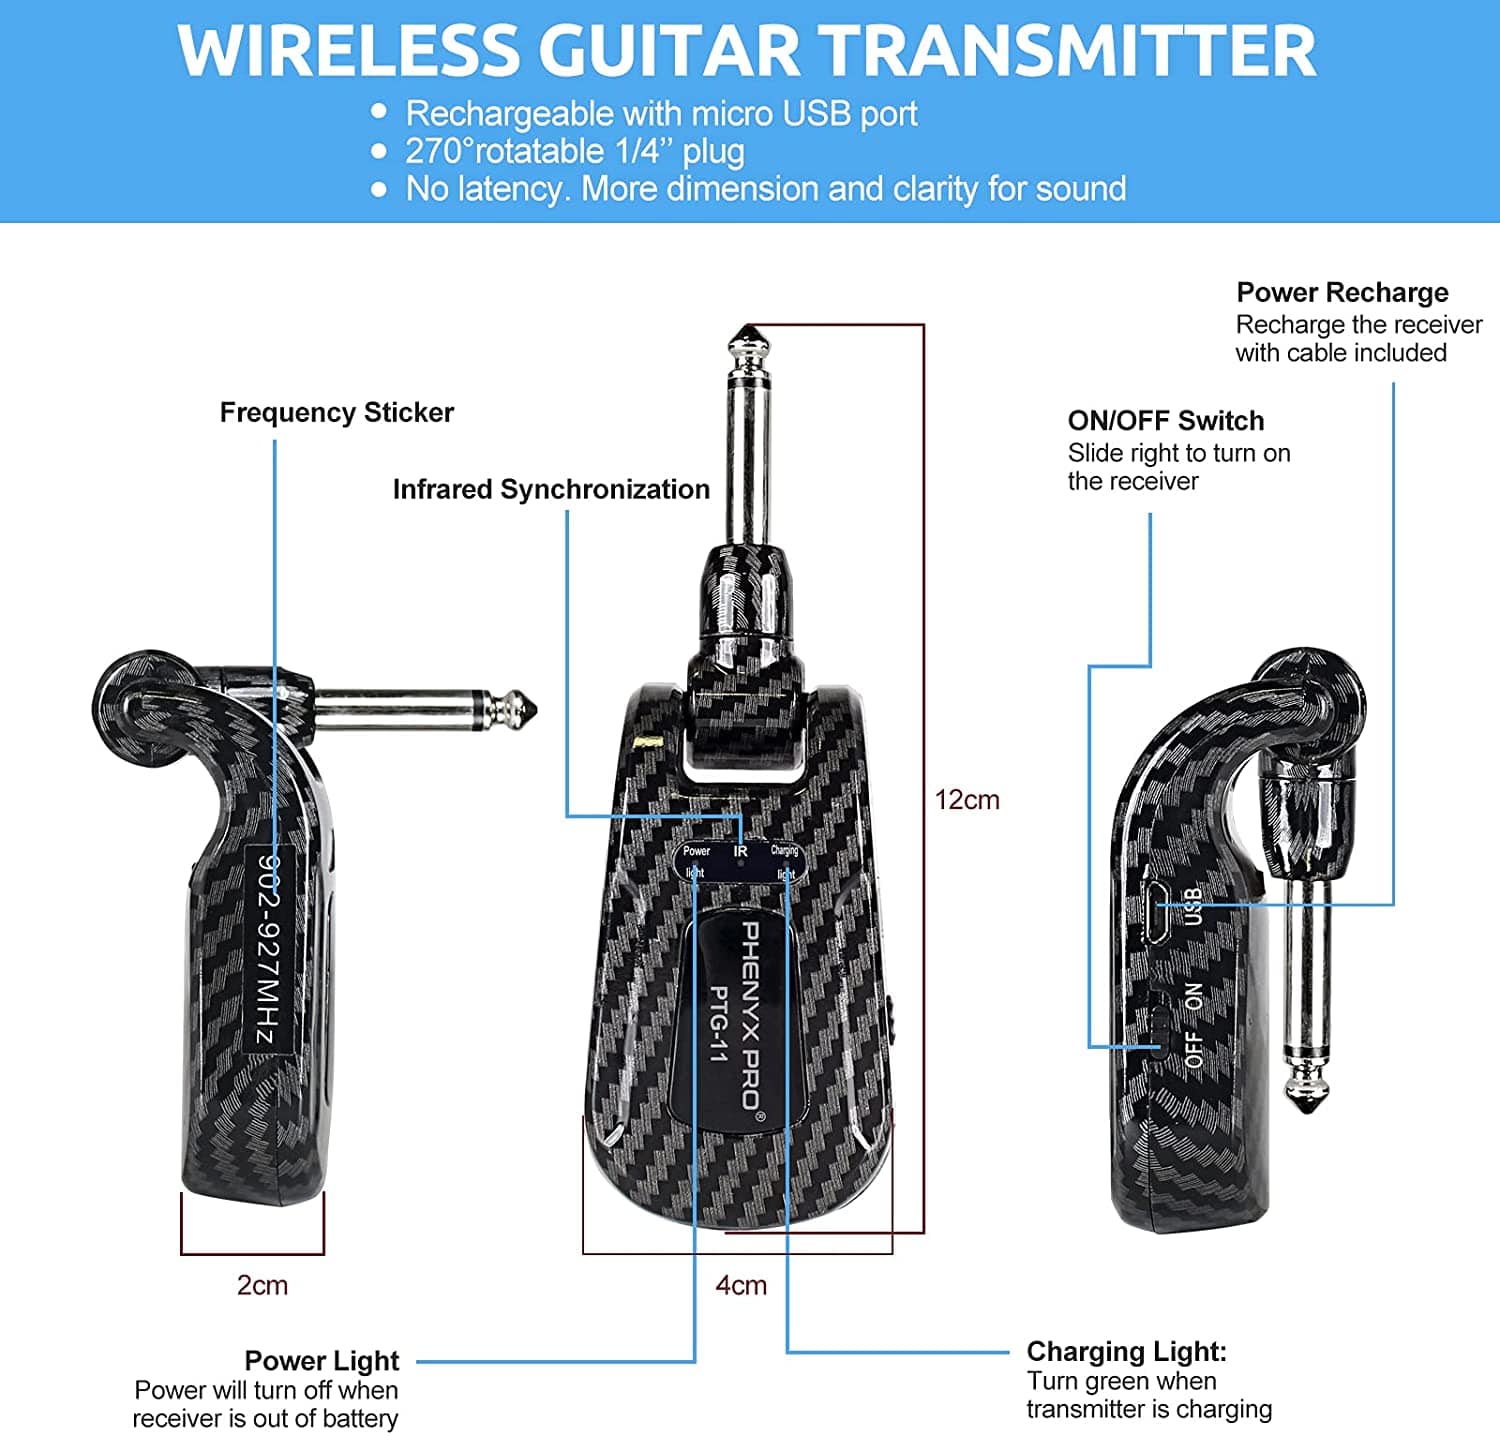 Phenyx Pro PTG-11 UHF True Diversity Wireless Guitar System, No latency guitar transmitter with more dimension and clarity sound